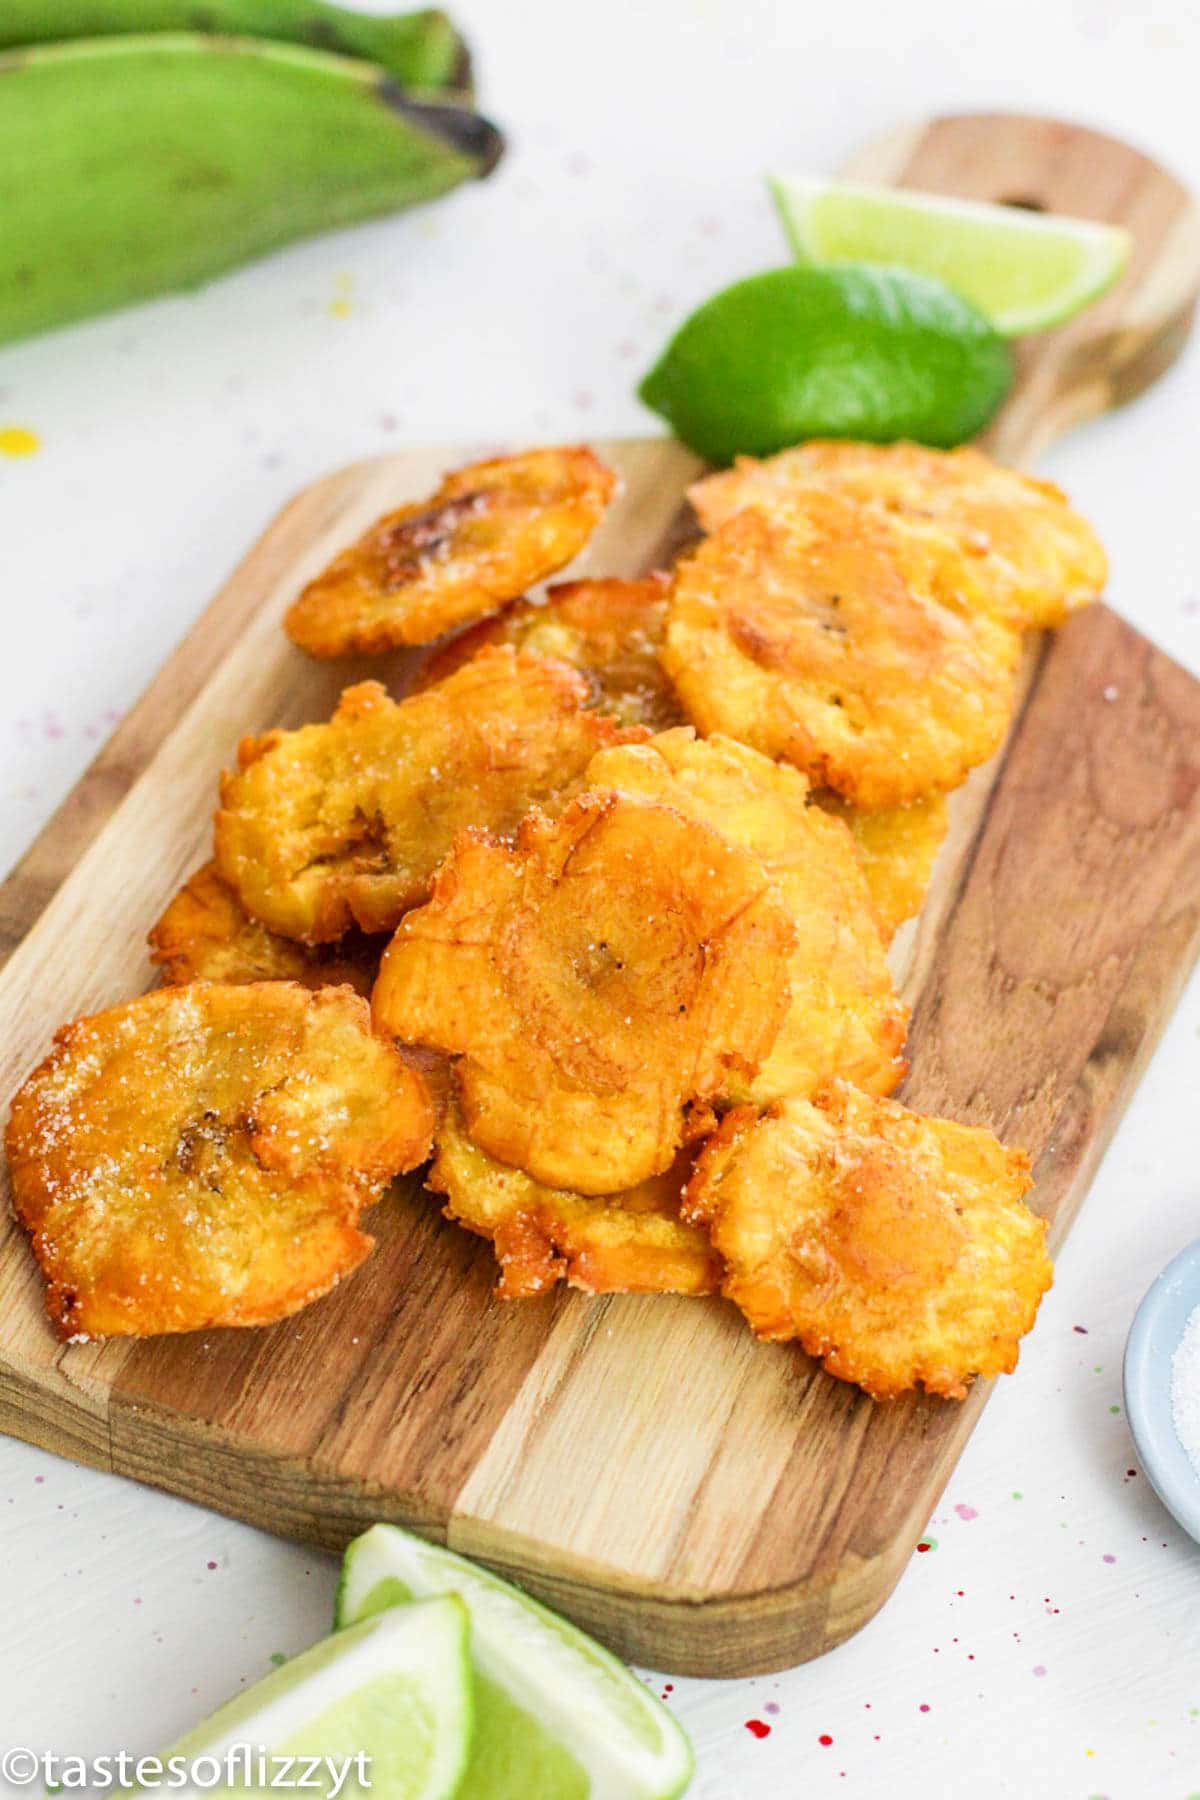 Fried Plantains Recipe {How to Make Tostones / Double Fried Plantains}